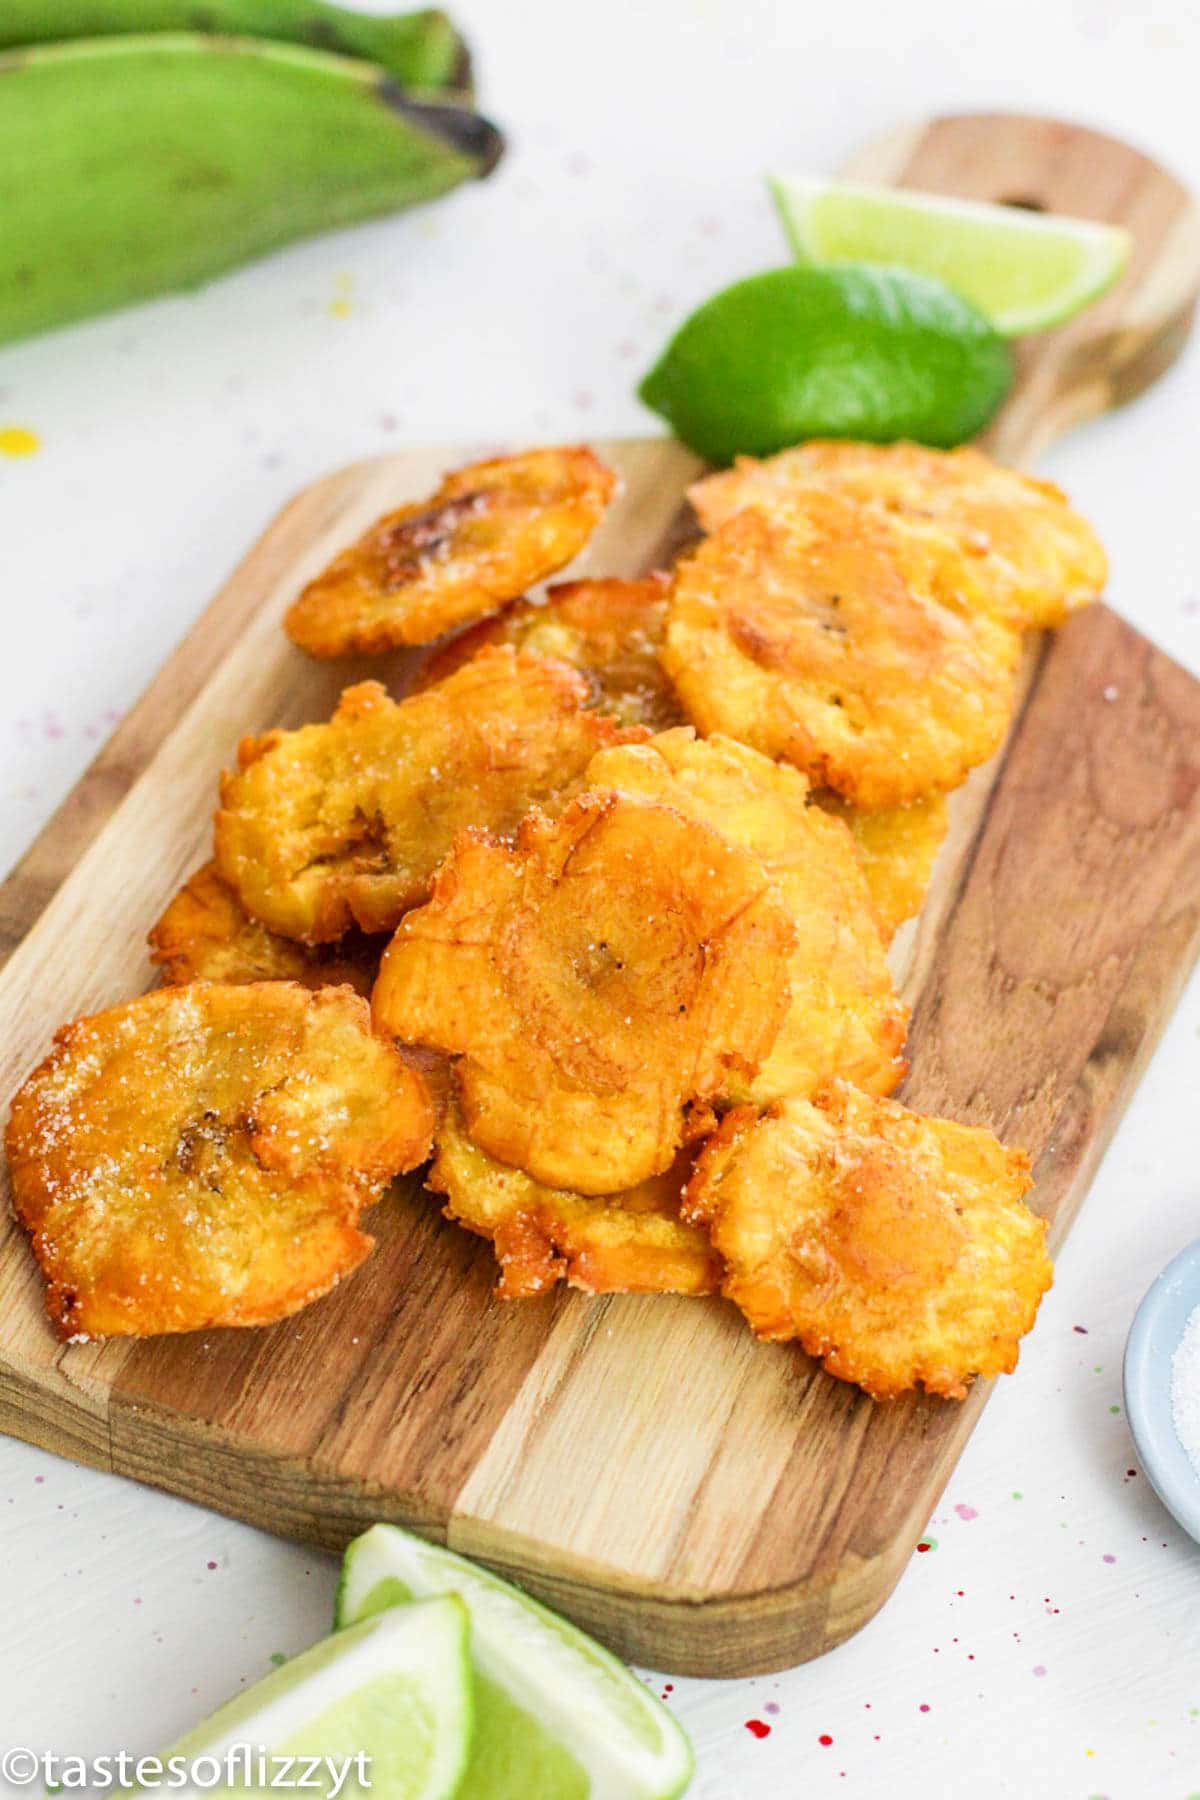 Fried Plantains Recipe {How to Make Tostones / Double Fried Plantains}